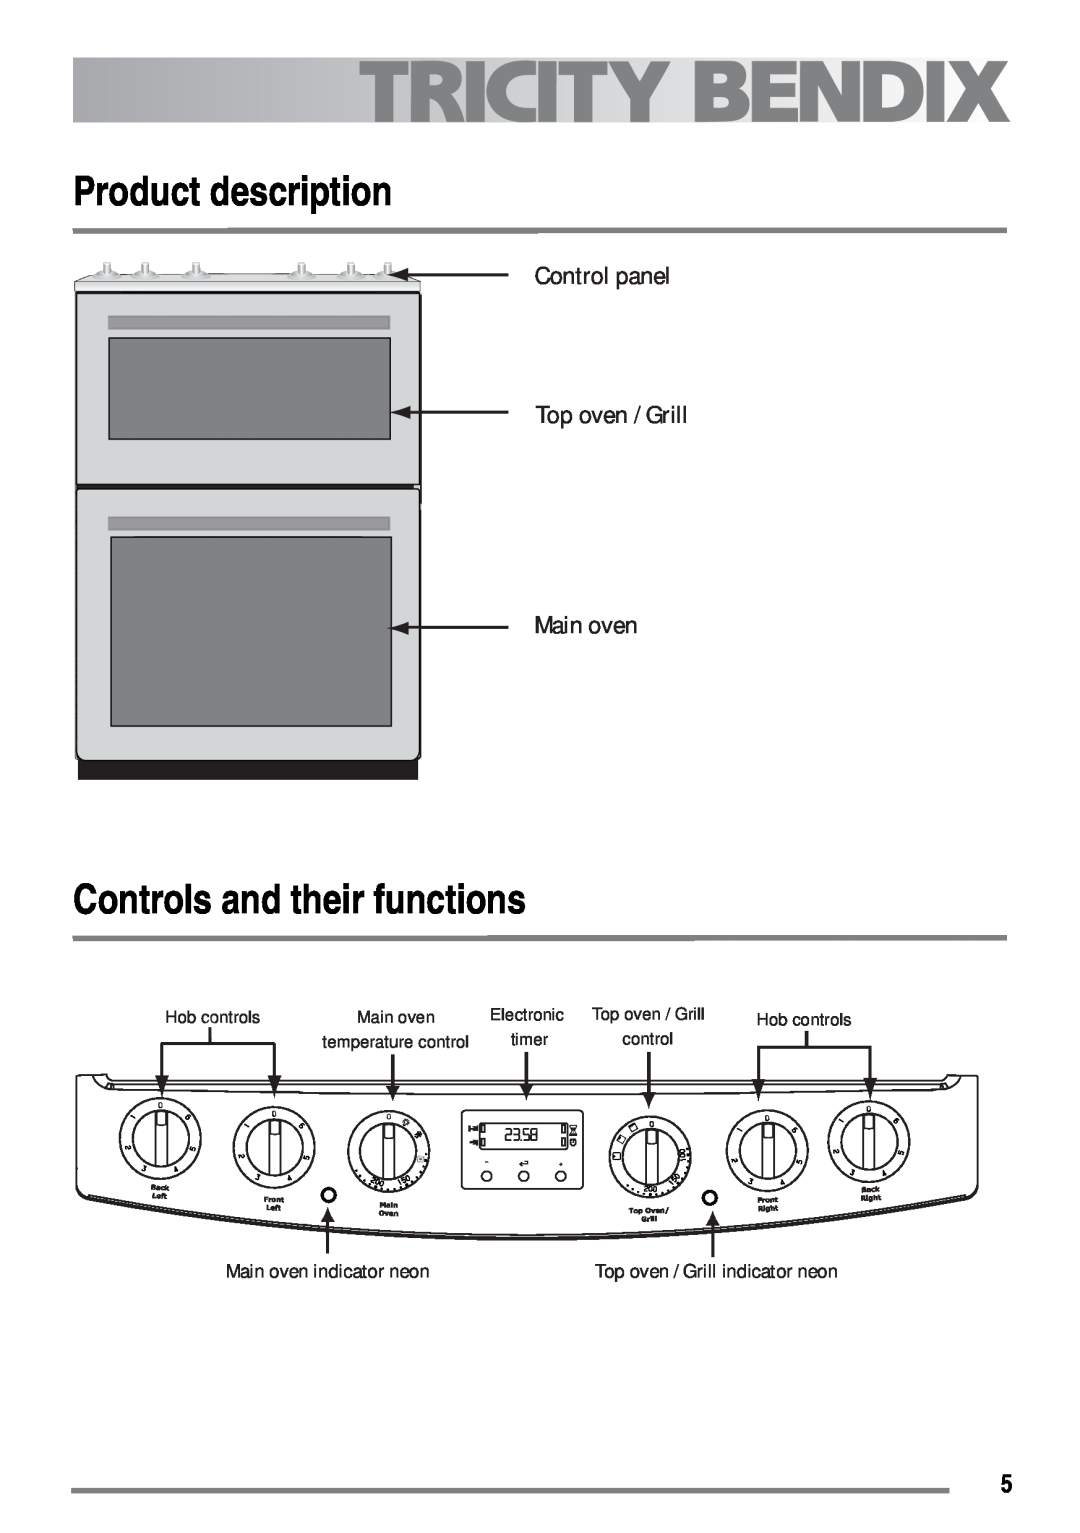 Tricity Bendix SE558 Product description, Controls and their functions, Control panel Top oven / Grill Main oven, timer 